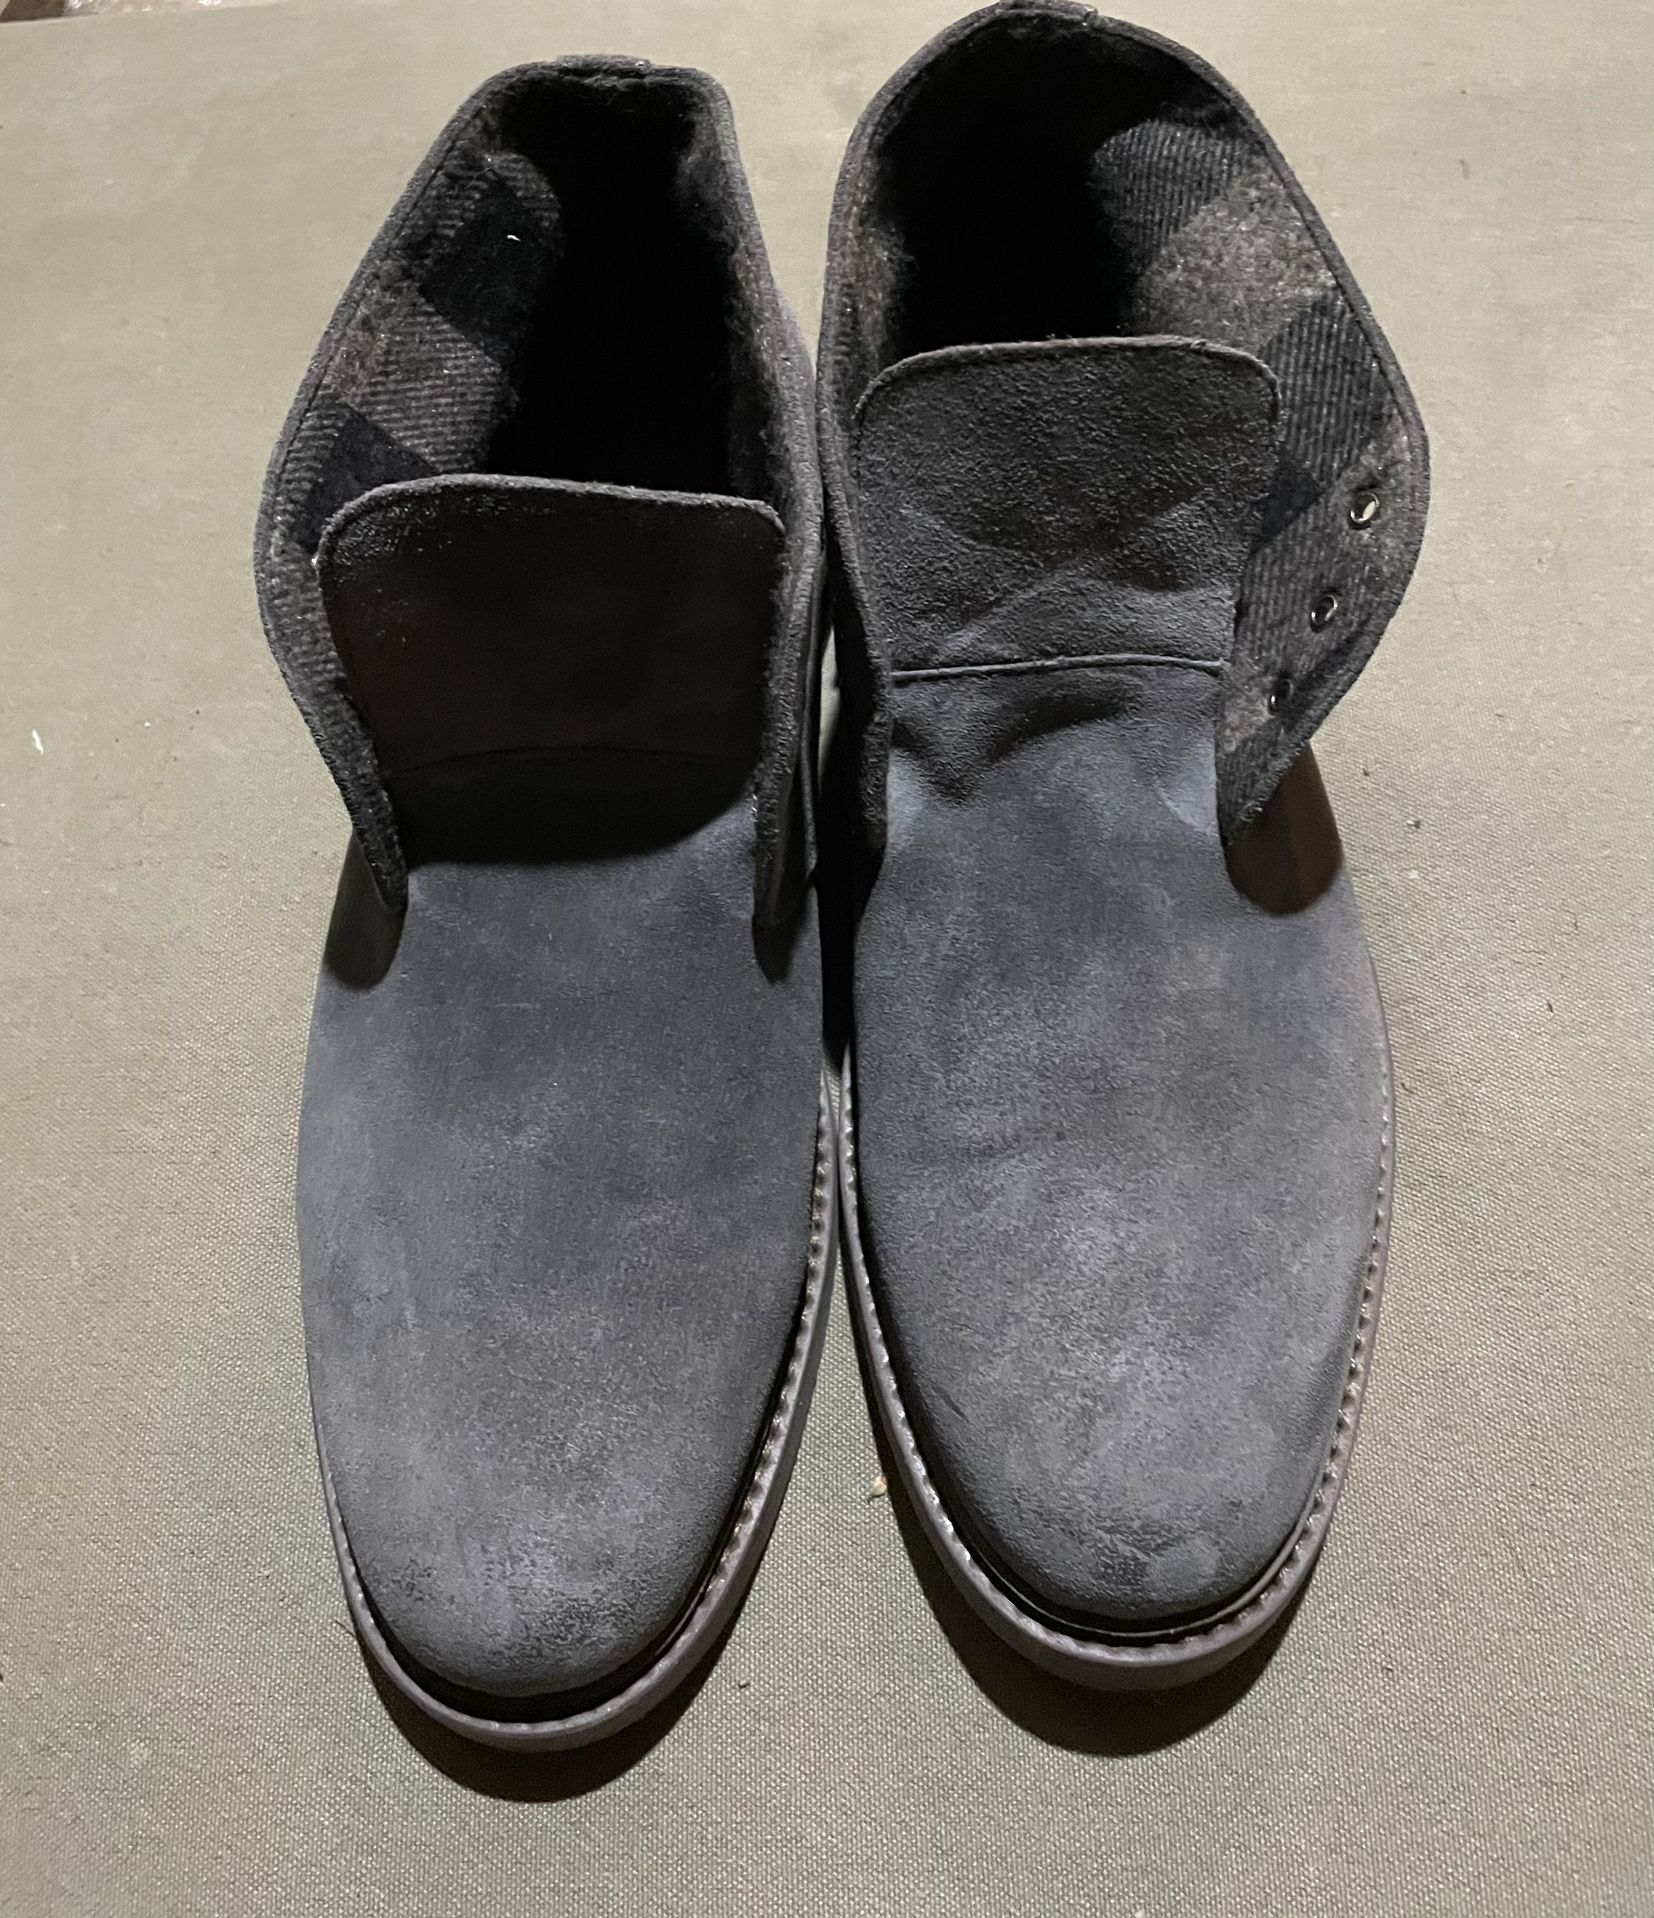 Men’s Gray Suede Leather Boots - Shoes Size 10 1/2